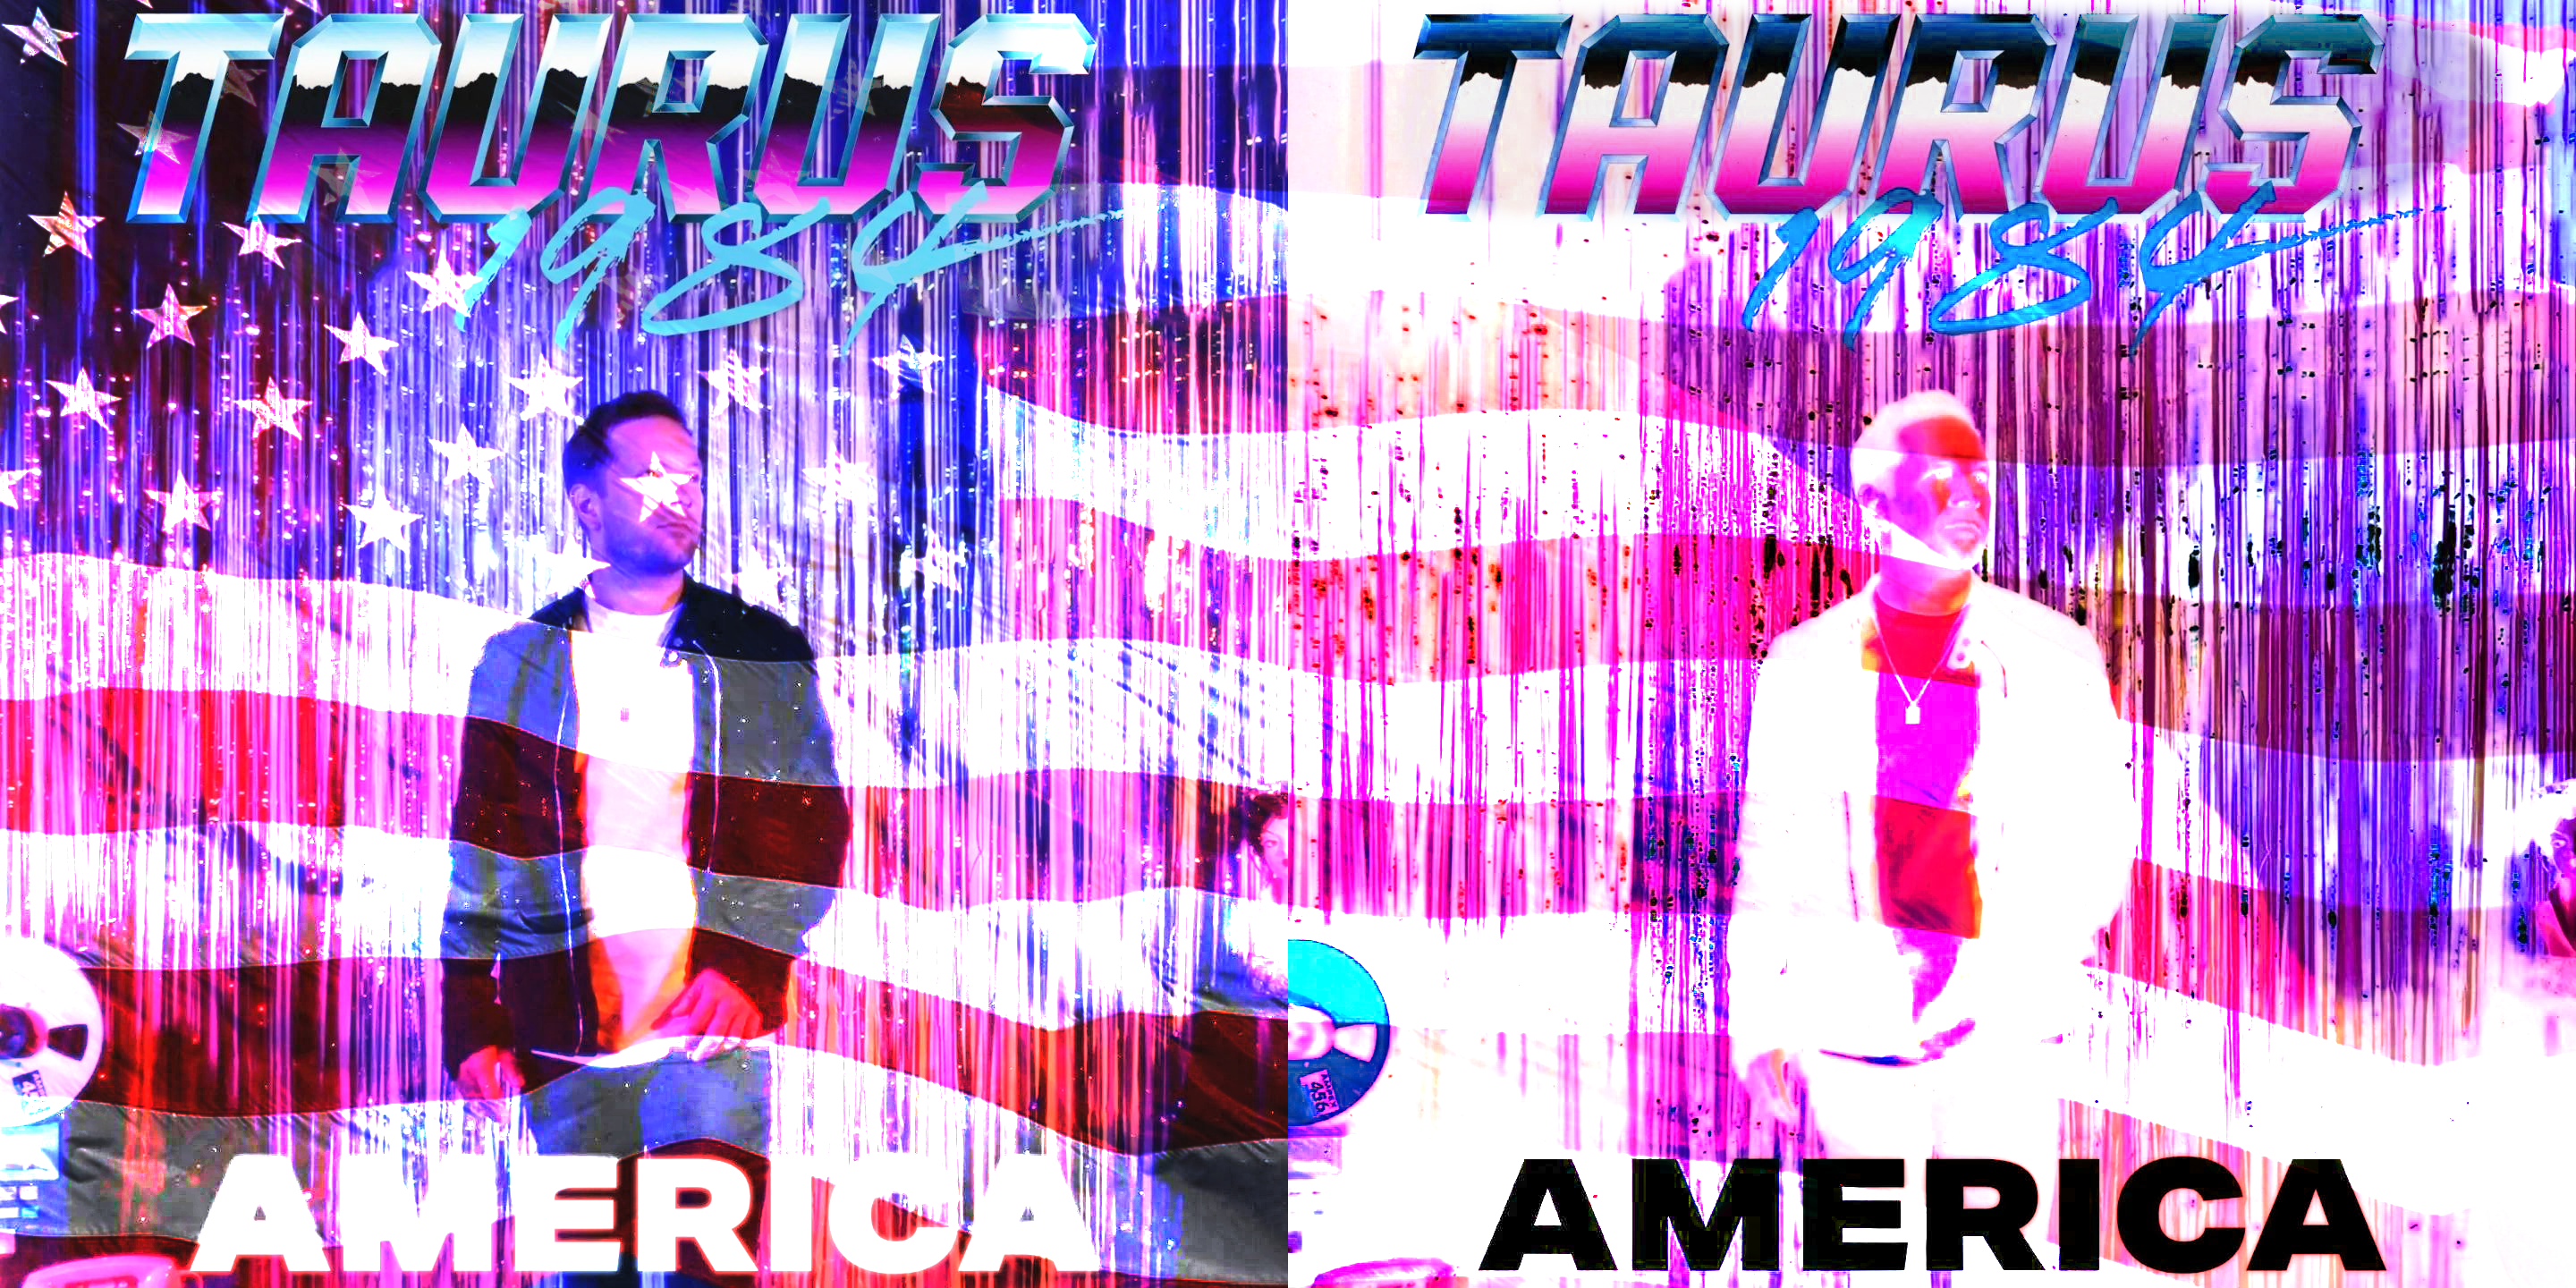 Taurus 1984 with their new single "America" from their album ,"Modern Romance," coming July 1, 2022.